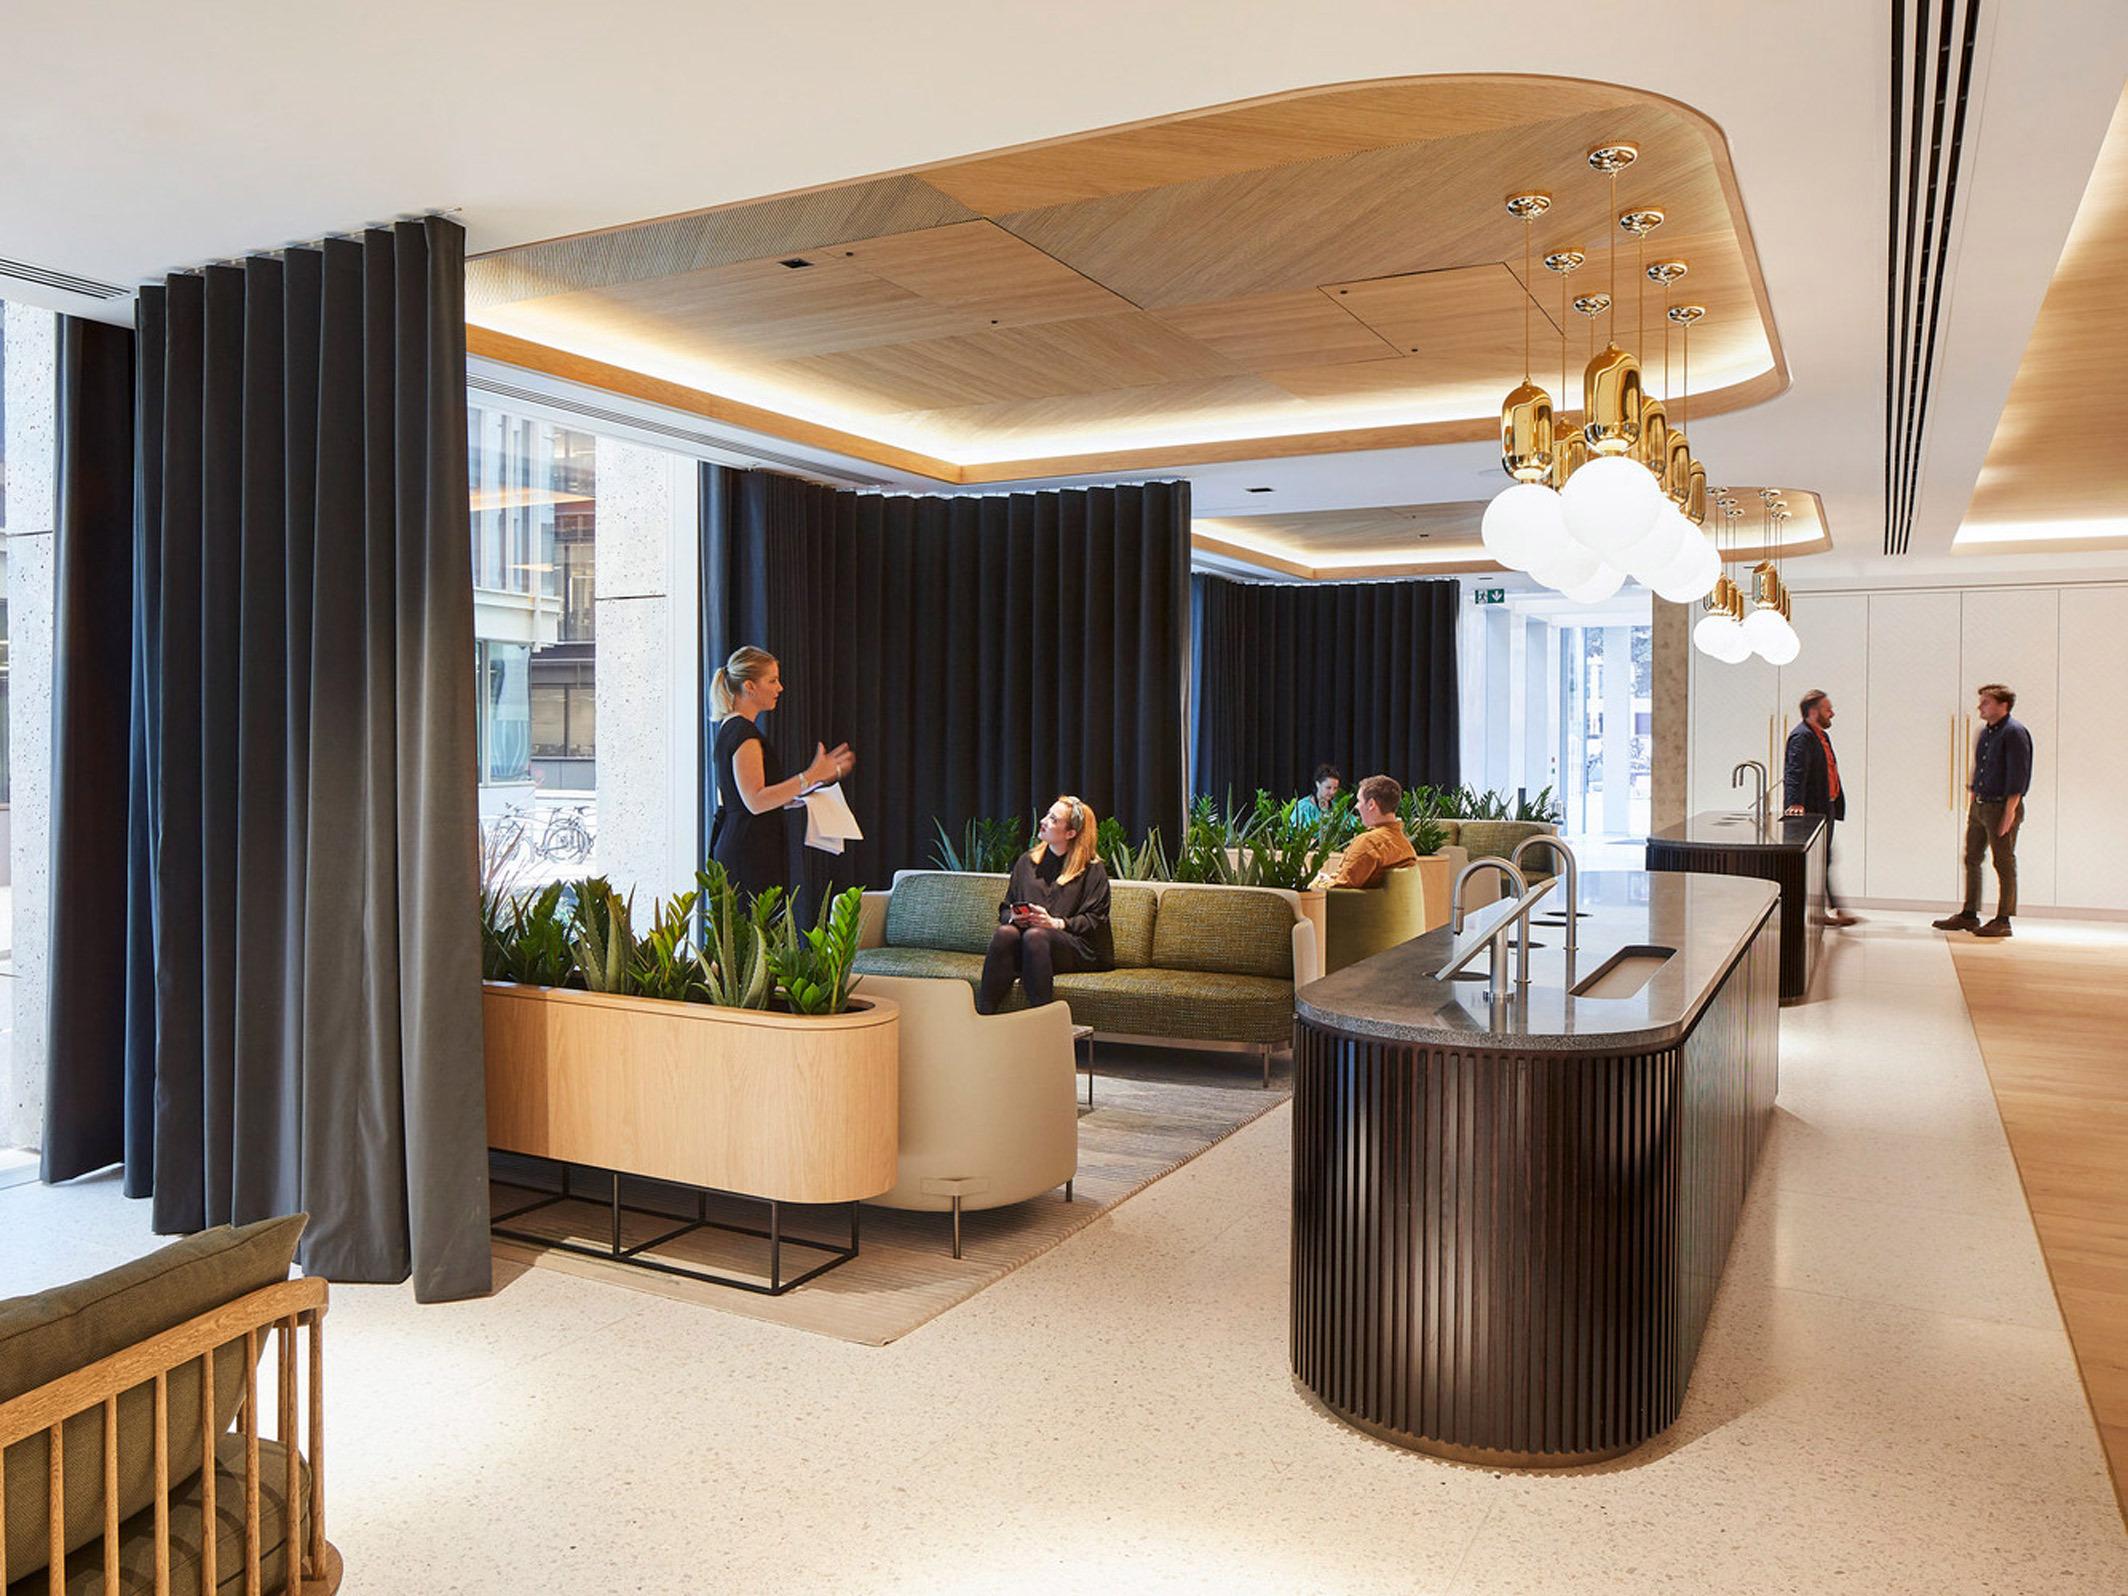 Modern office lobby with a warm, welcoming atmosphere, featuring curved wooden reception desk, elegant suspended light fixtures, and vertical drapery creating private nooks. Rich plant arrangements add a natural touch, while people converse and work, emphasizing the space's functional design.